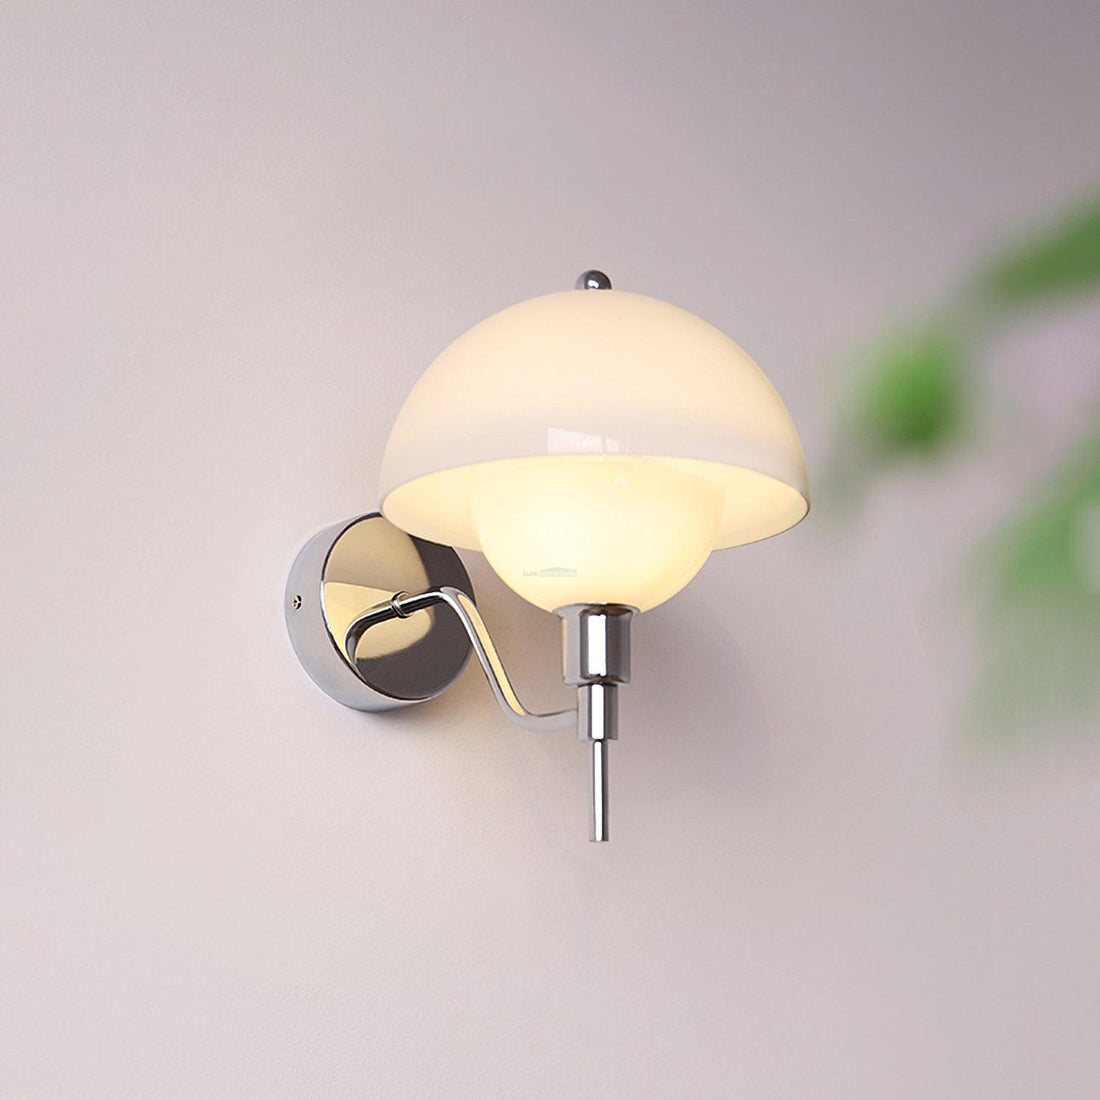 Bidle Wall Sconce